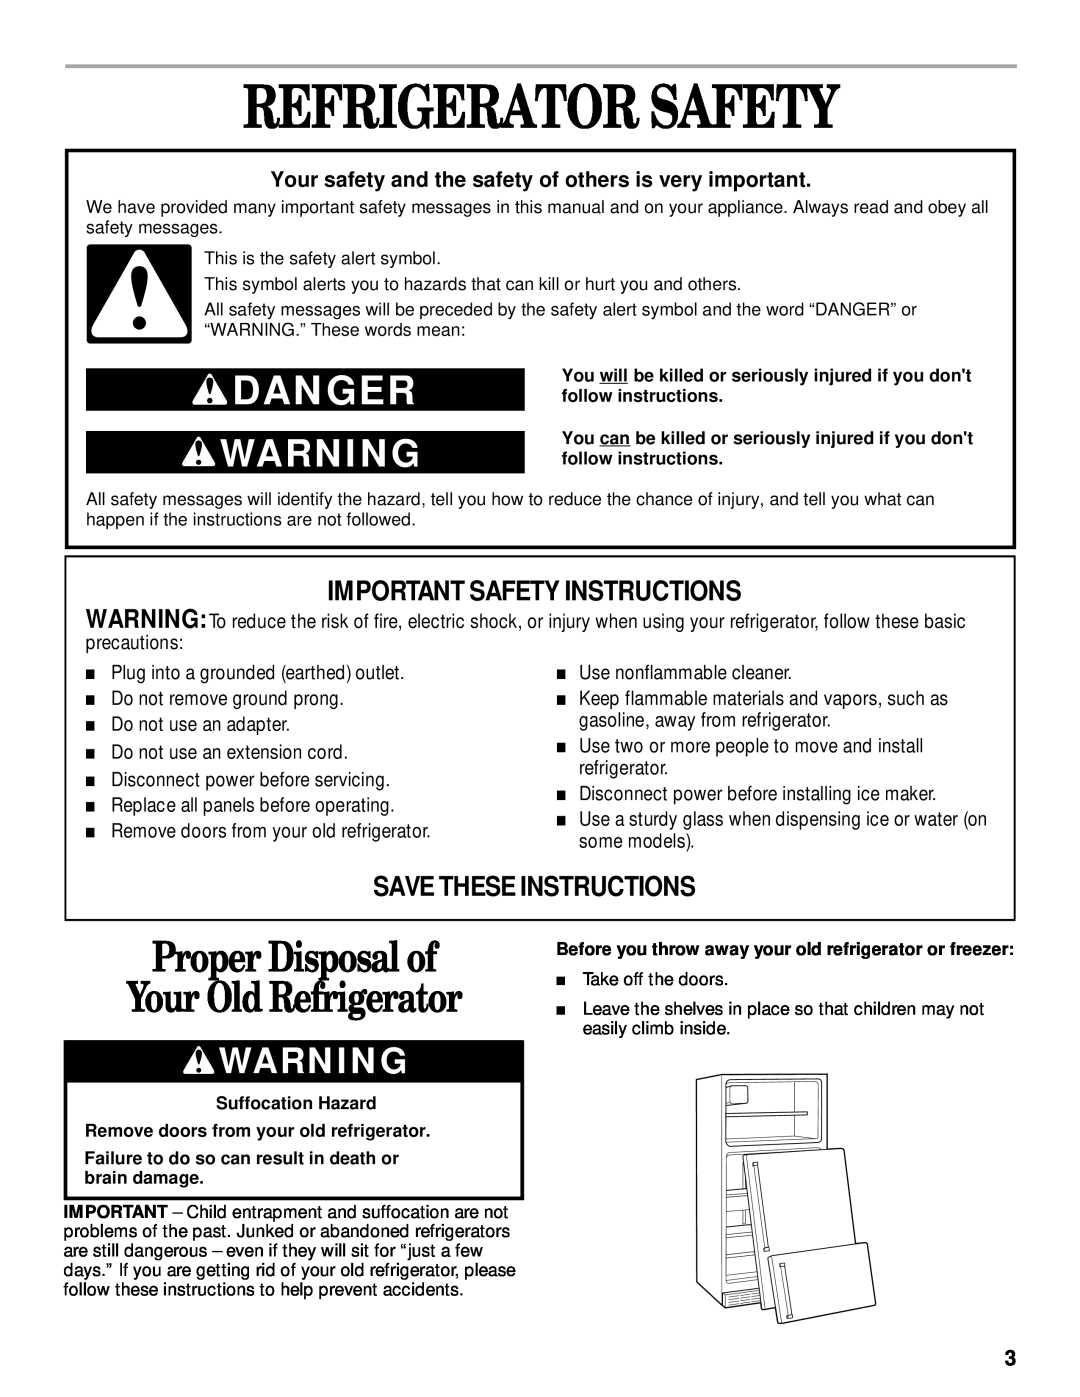 Whirlpool 8ET8MTKXKT00 Refrigerator Safety, Proper Disposal of Your Old Refrigerator, Danger, Save These Instructions 